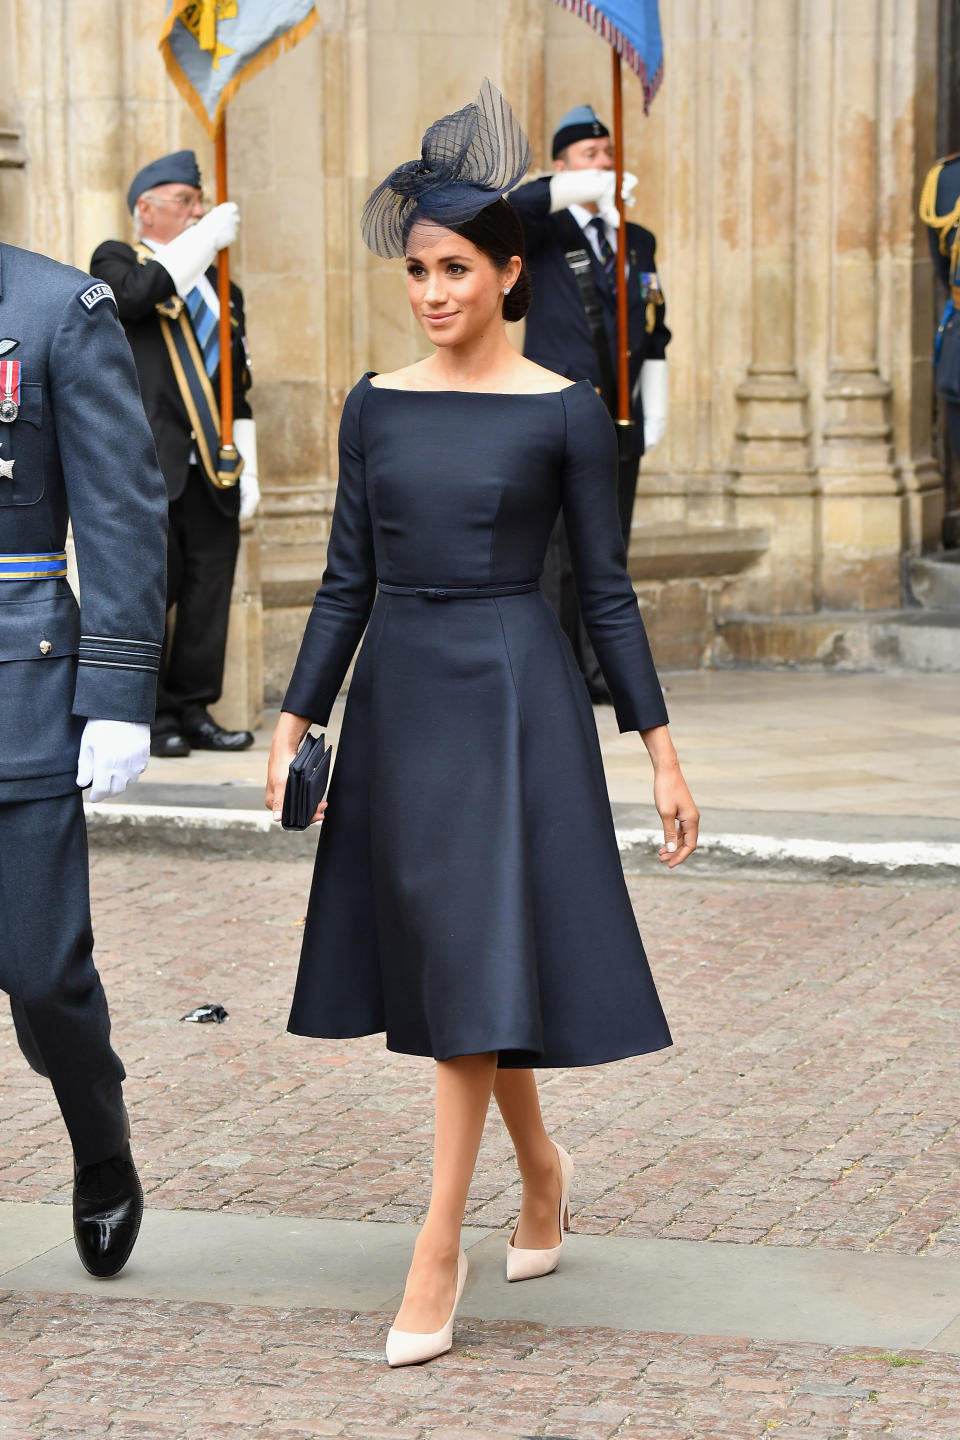 Meghan wore a <span>bespoke Dior dress featuring her go-to bateau neckline. </span>Photo: Getty